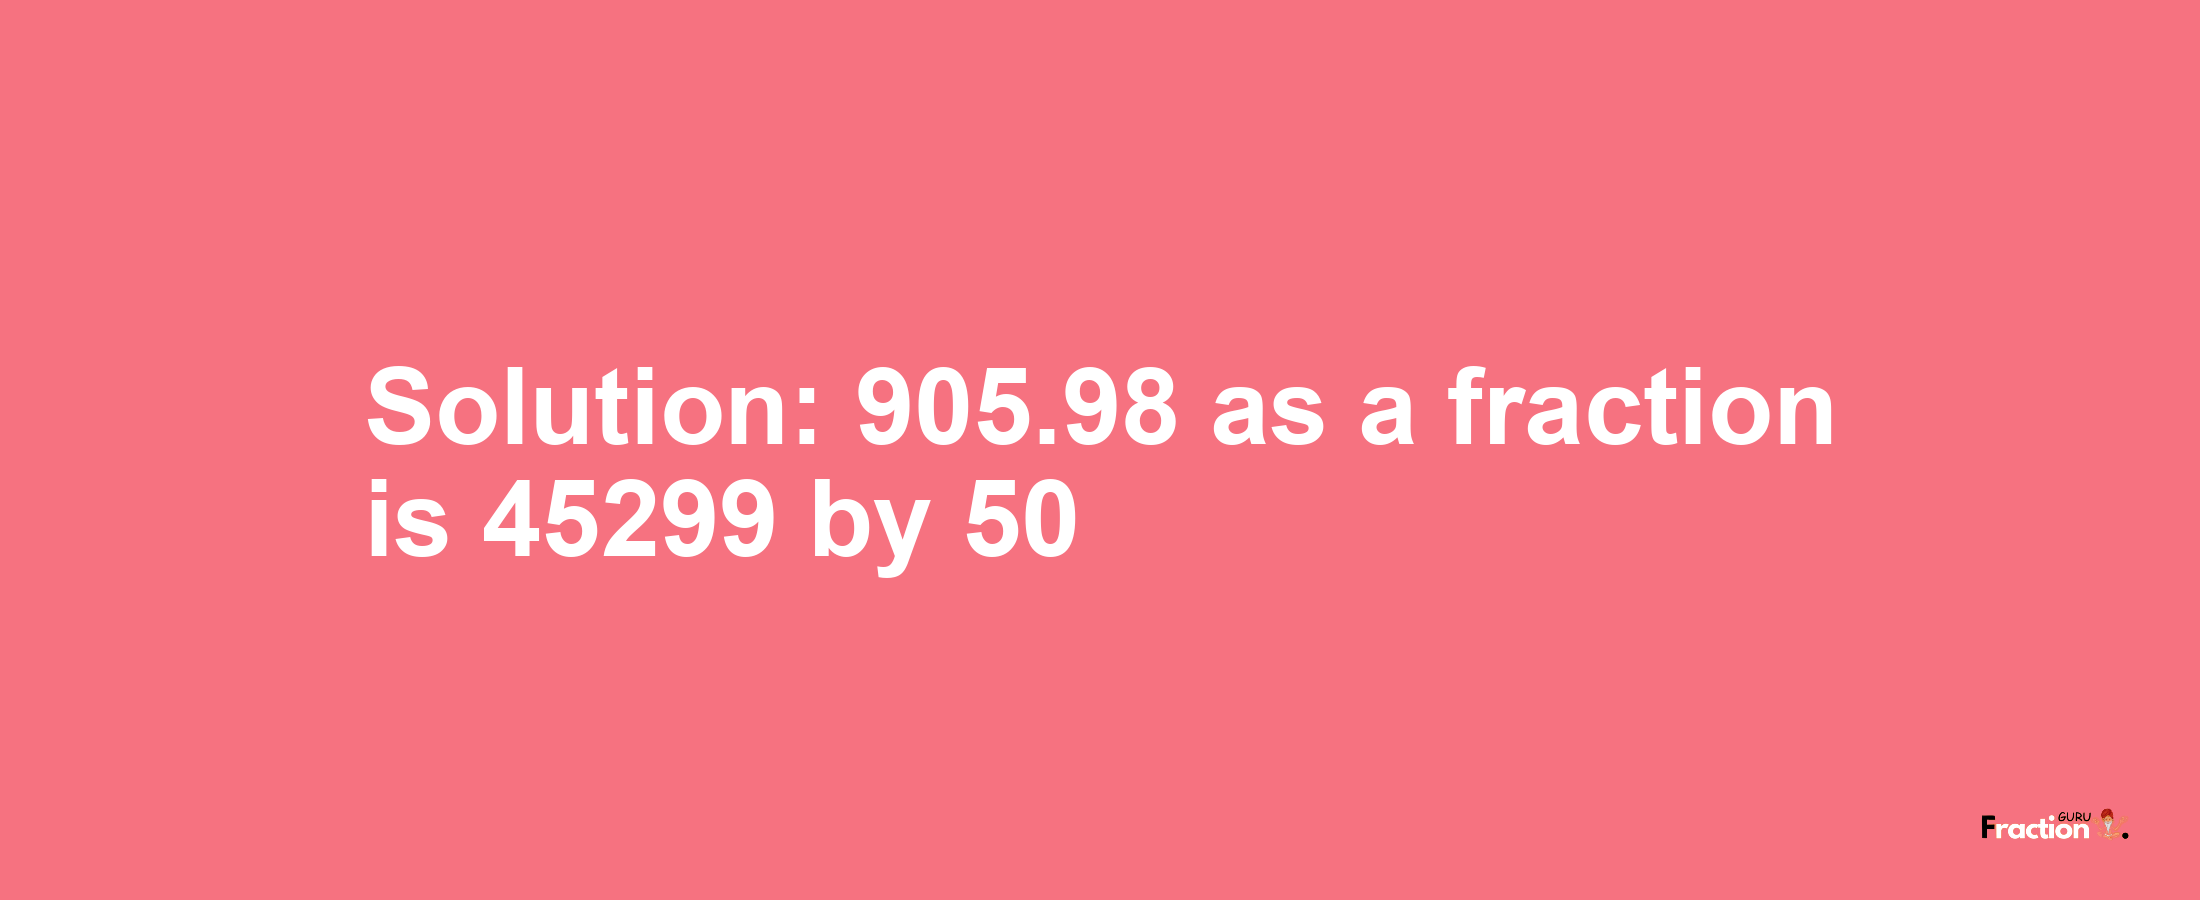 Solution:905.98 as a fraction is 45299/50